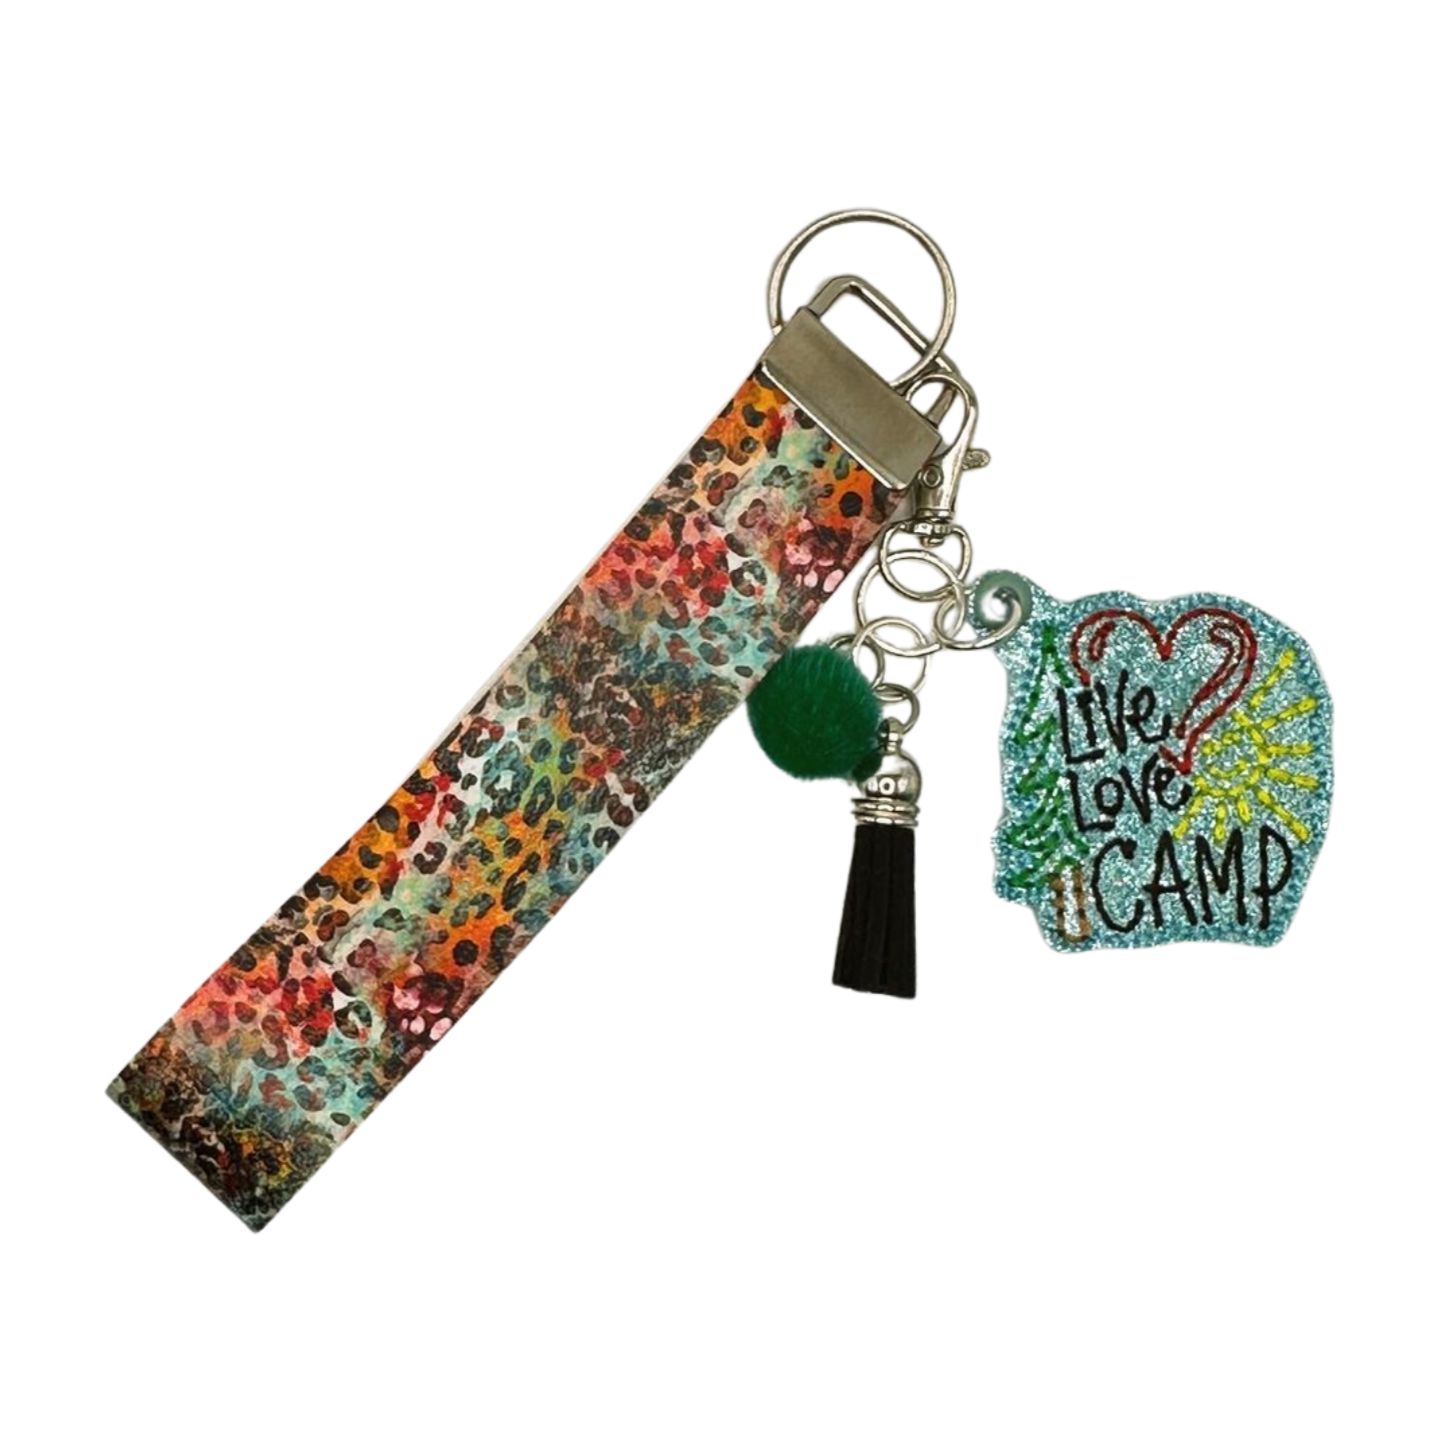 Live Love Camp Keychain and Wristlet